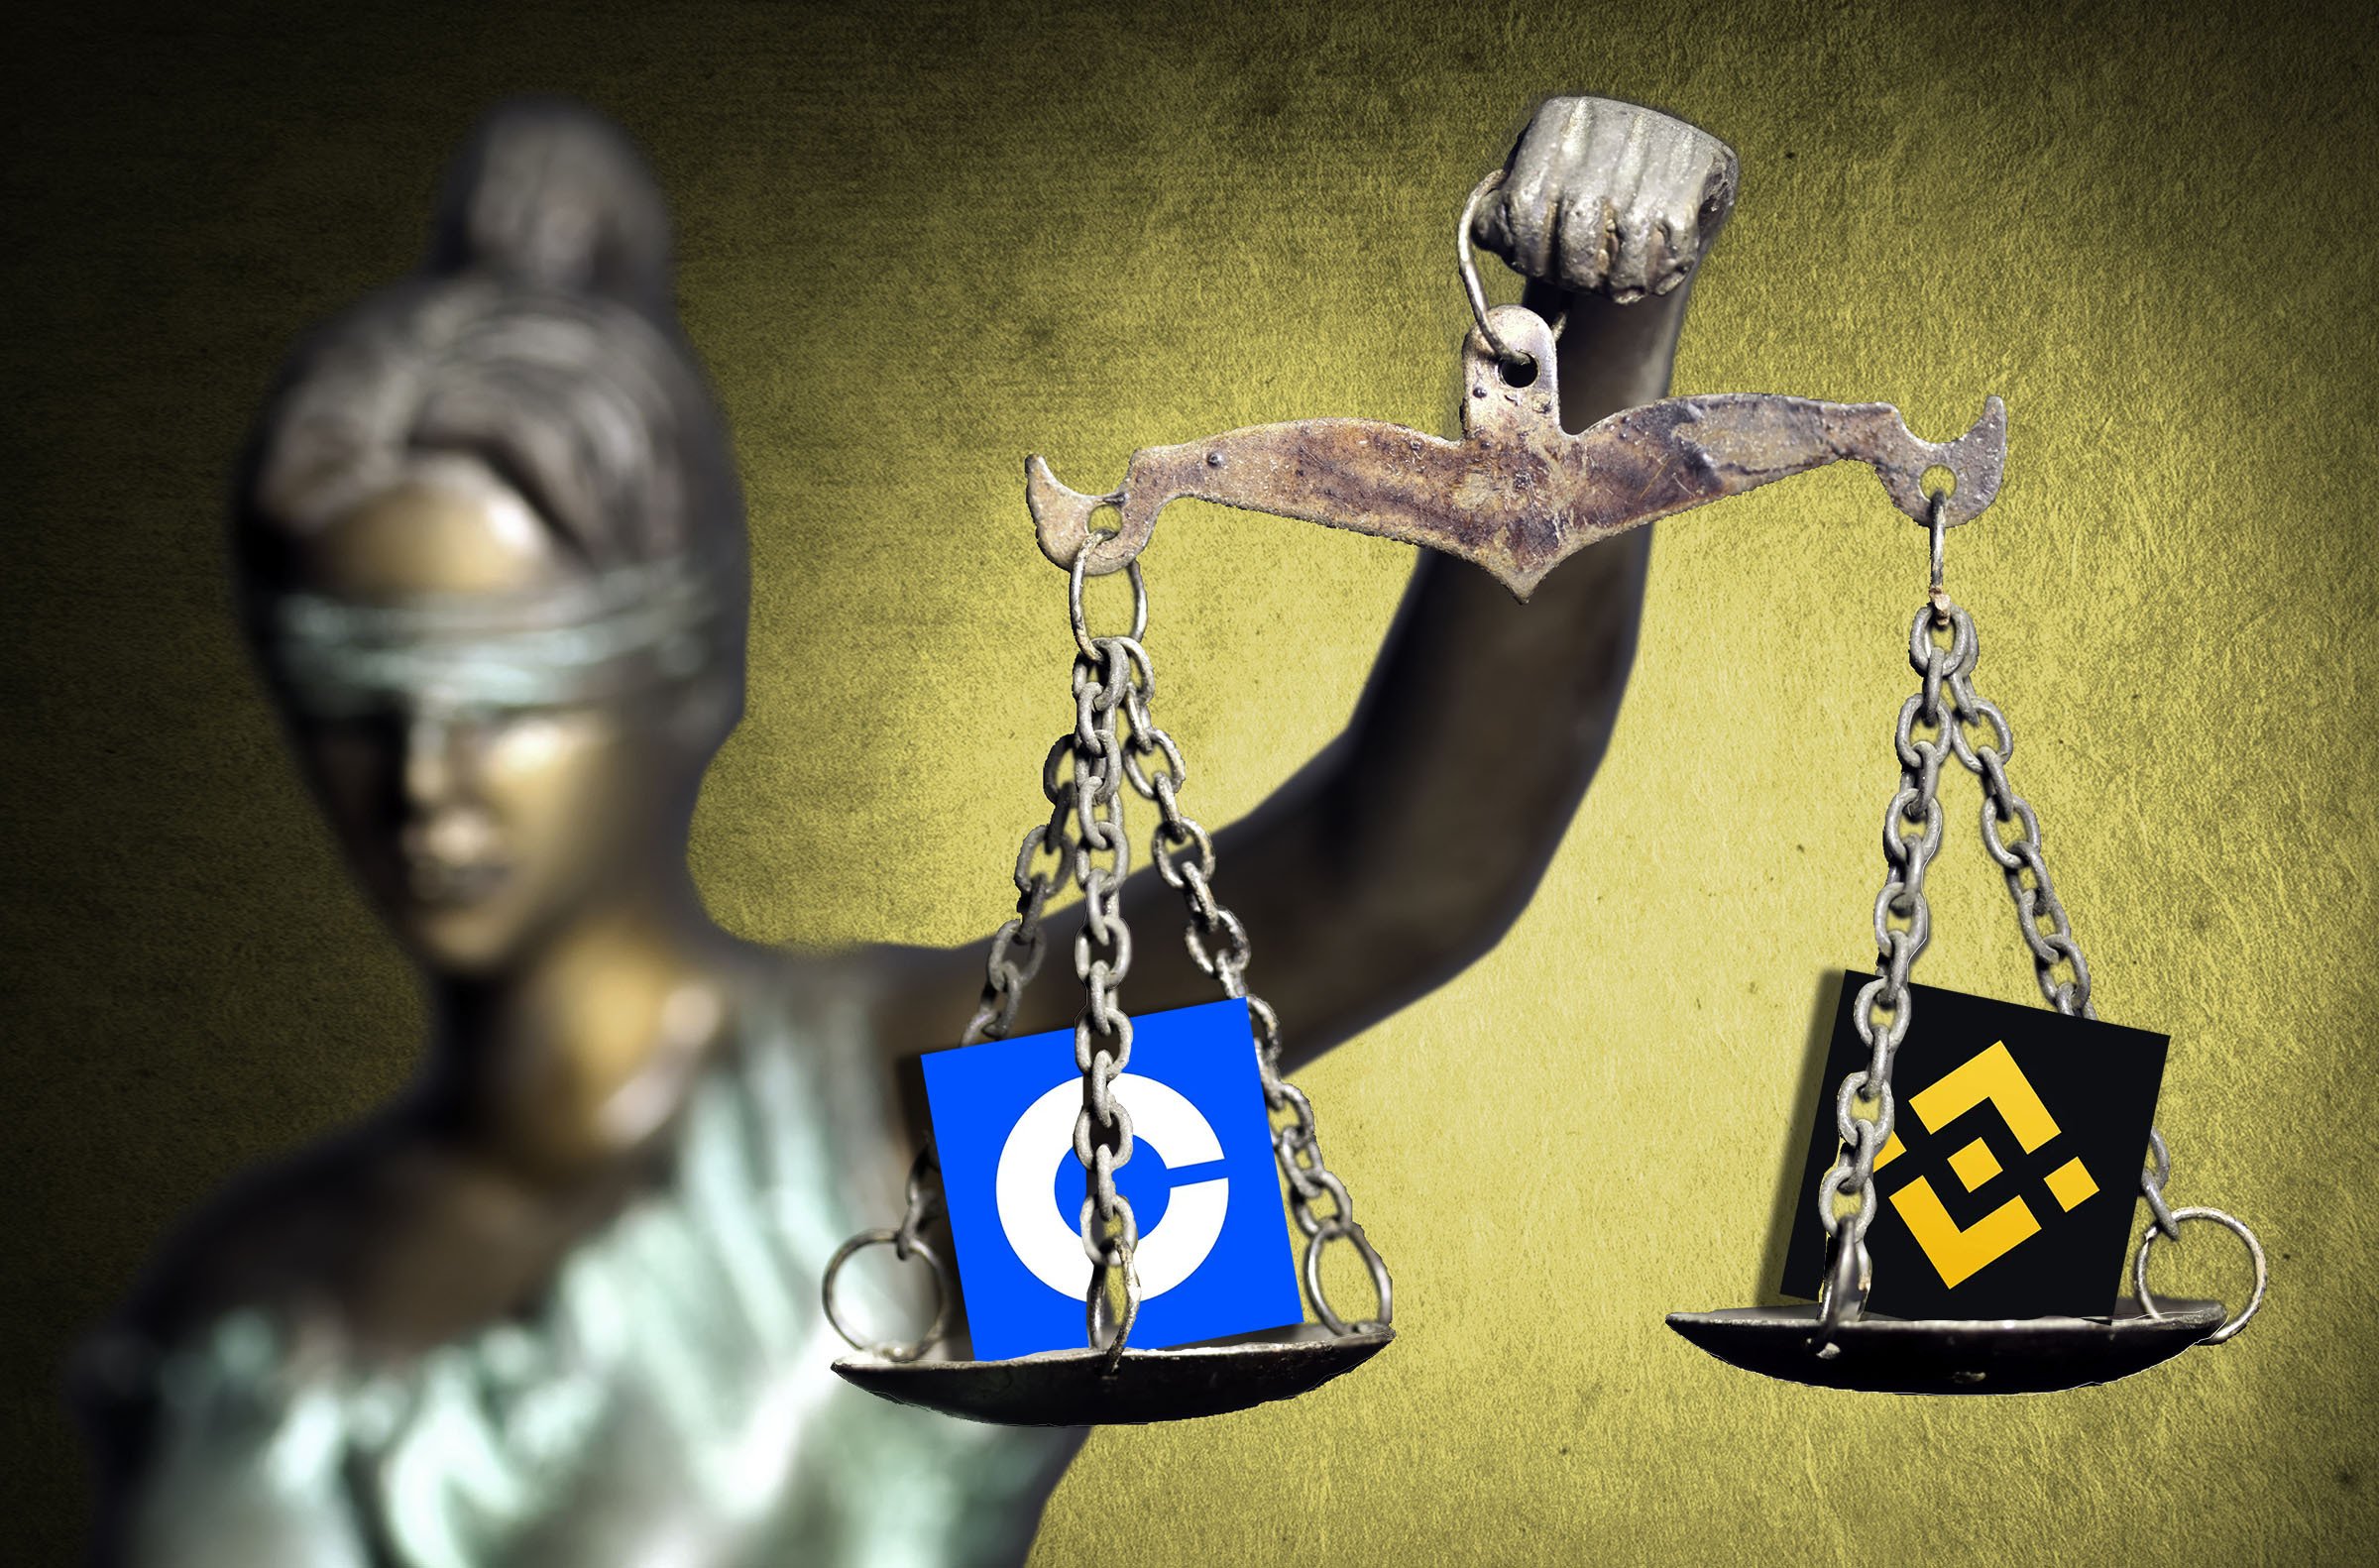 What's the Difference Between the Binance and Coinbase SEC Lawsuits? - Decrypt